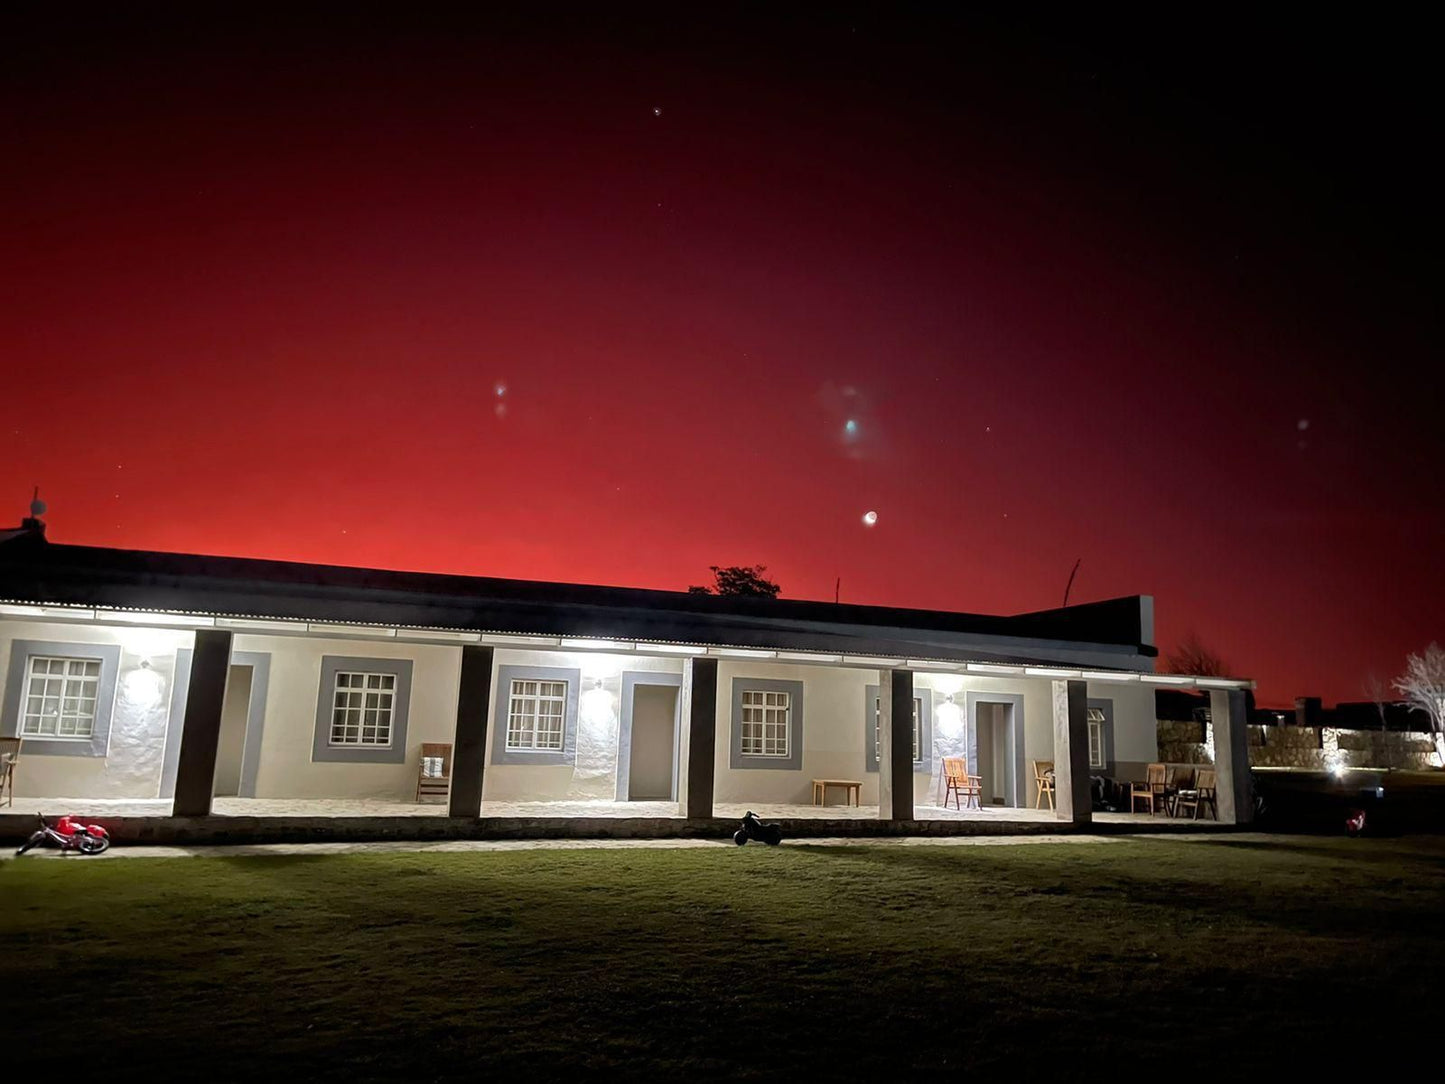 Quaggasfontein Private Game Reserve Colesberg Northern Cape South Africa House, Building, Architecture, Night Sky, Nature